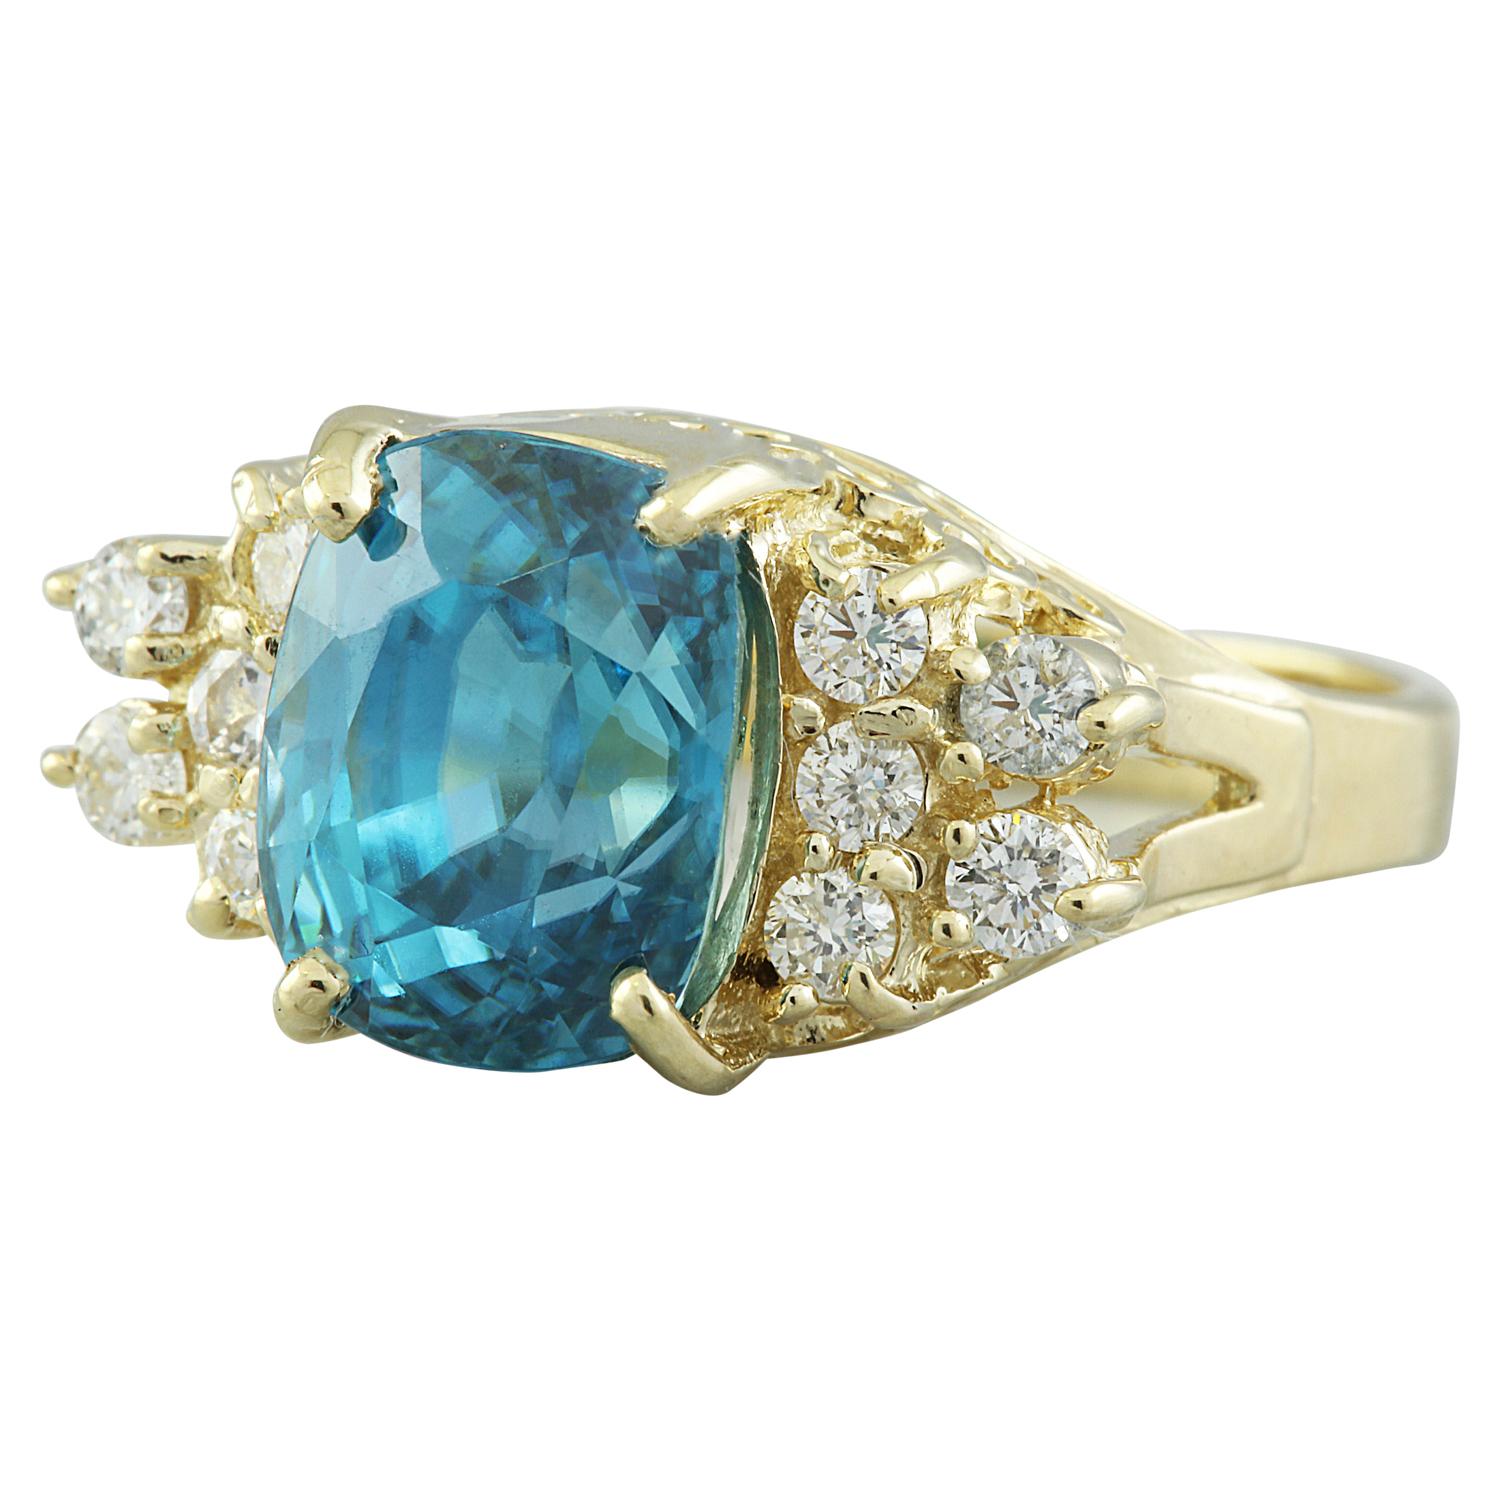 7.12 Carat Natural Zircon 14 Karat Solid Yellow Gold Diamond Ring In New Condition For Sale In Los Angeles, CA